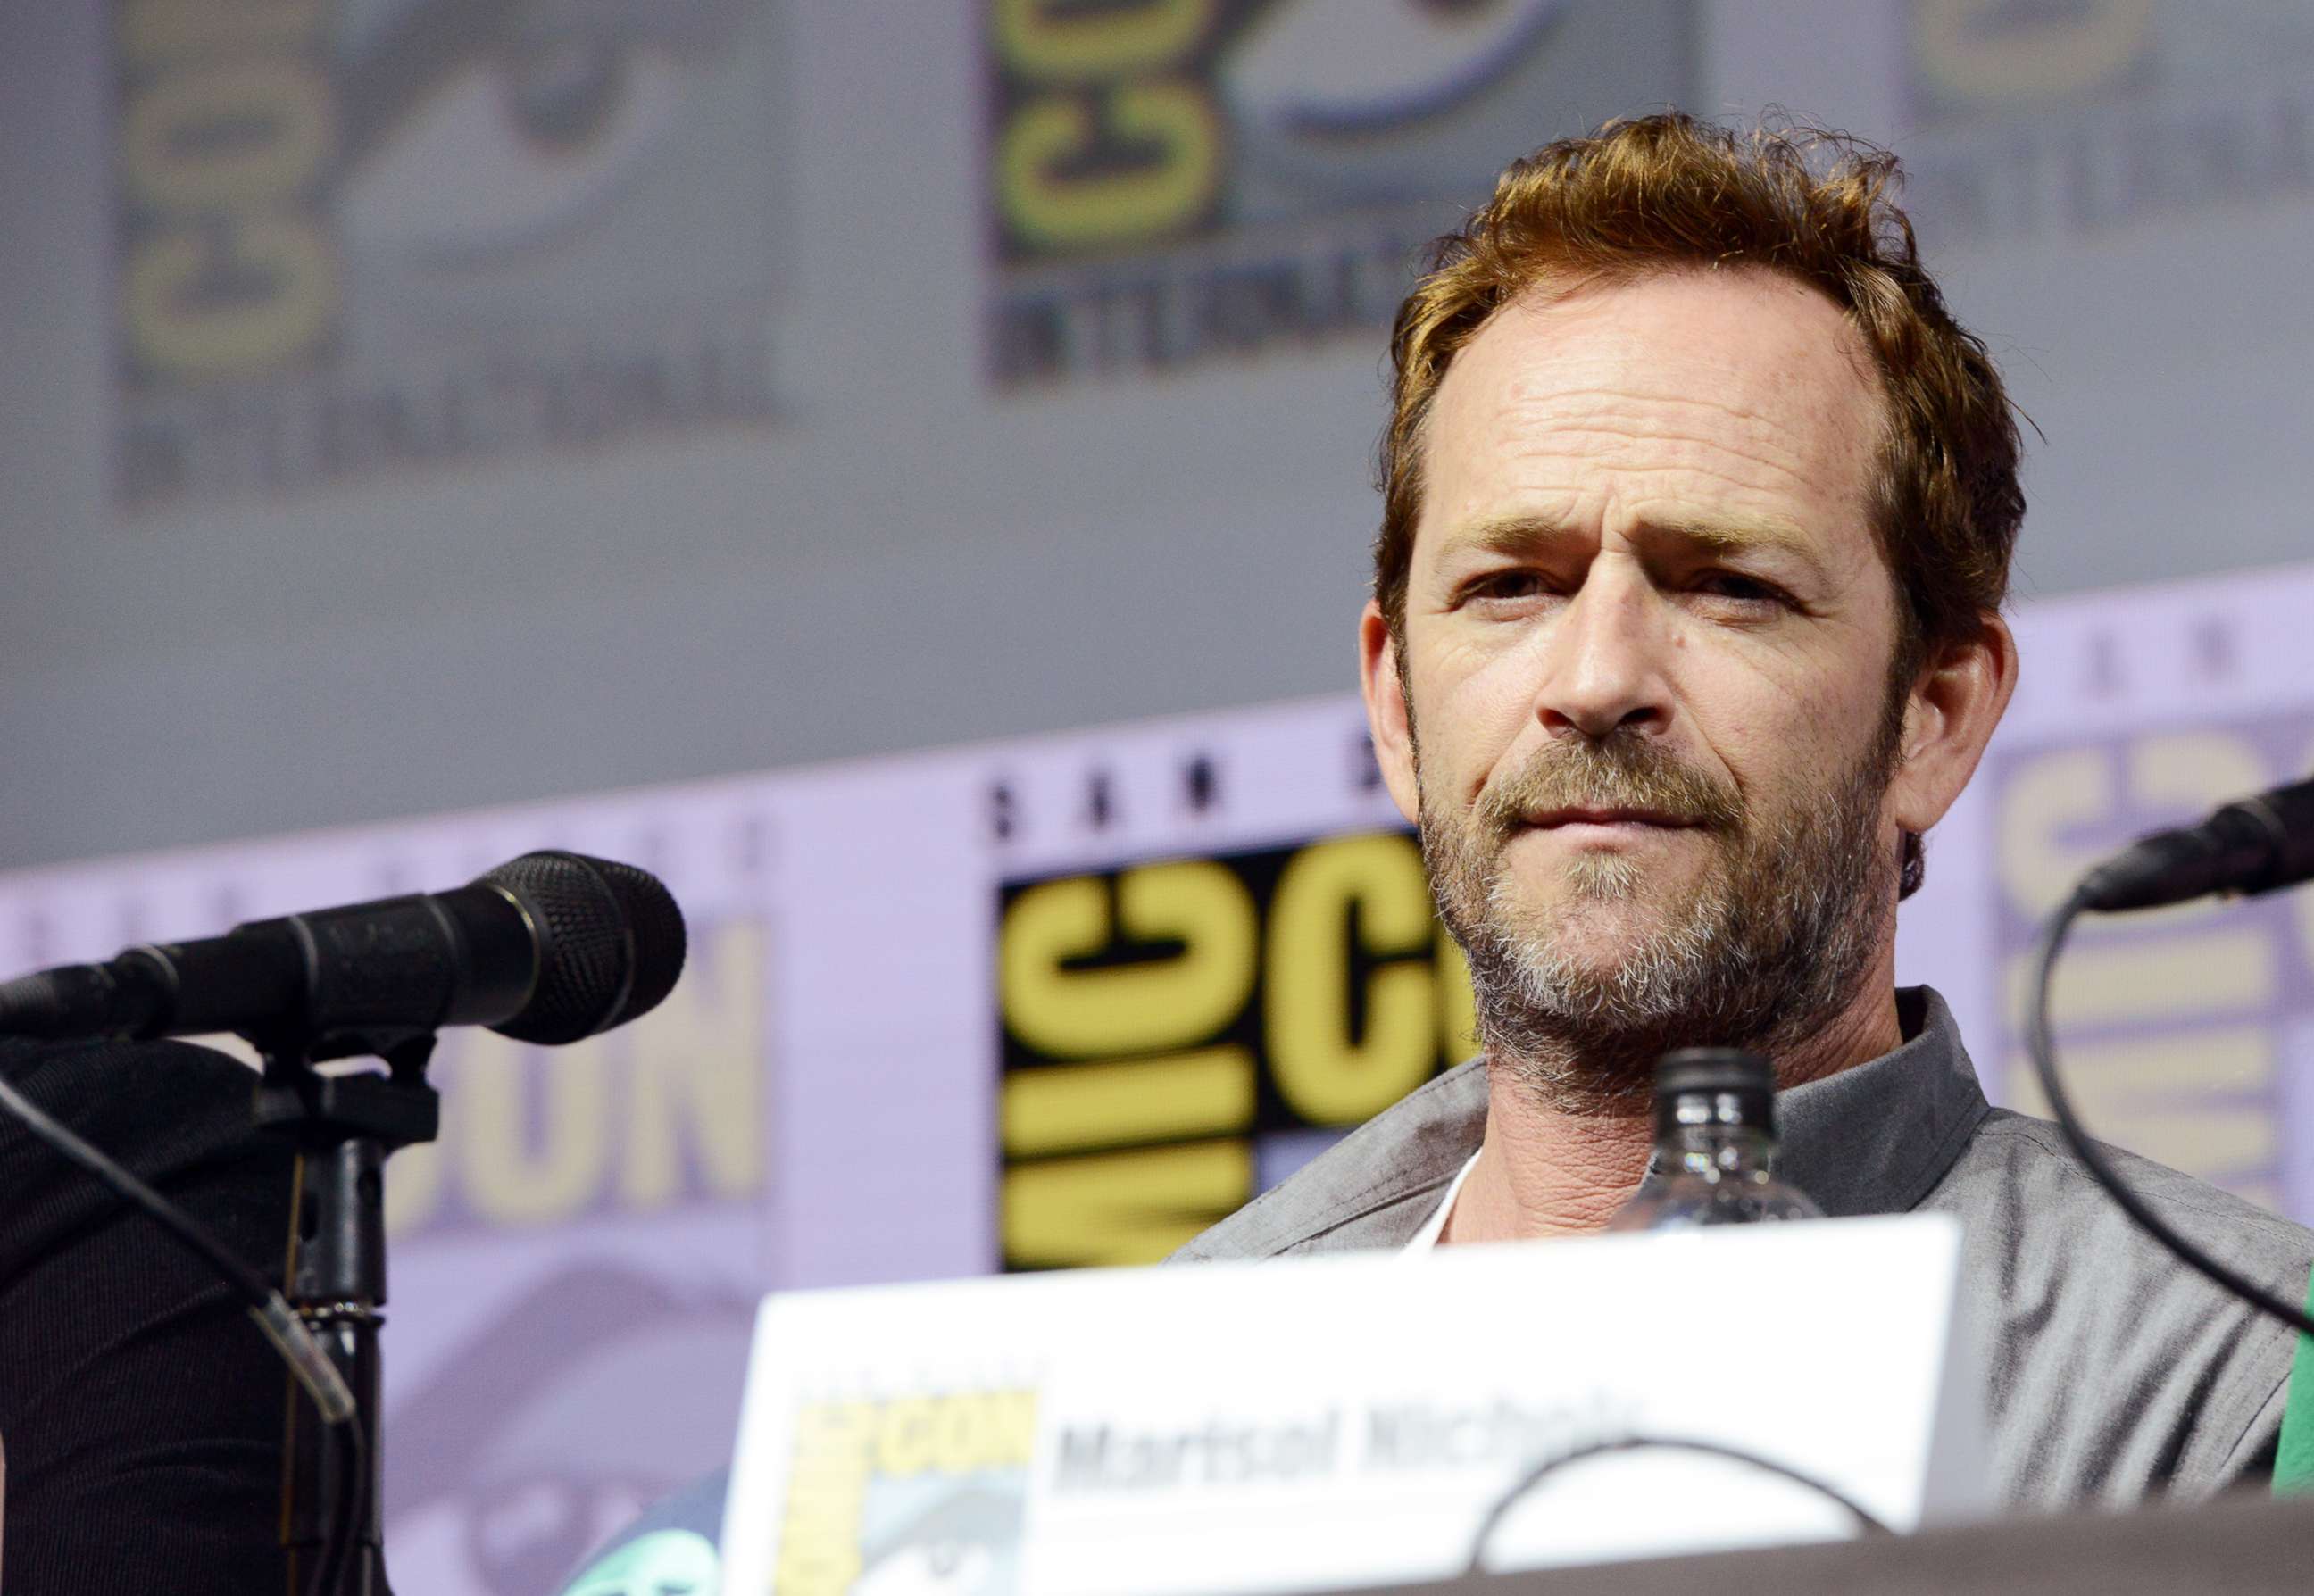 PHOTO: Luke Perry speaks an event on July 22, 2018.